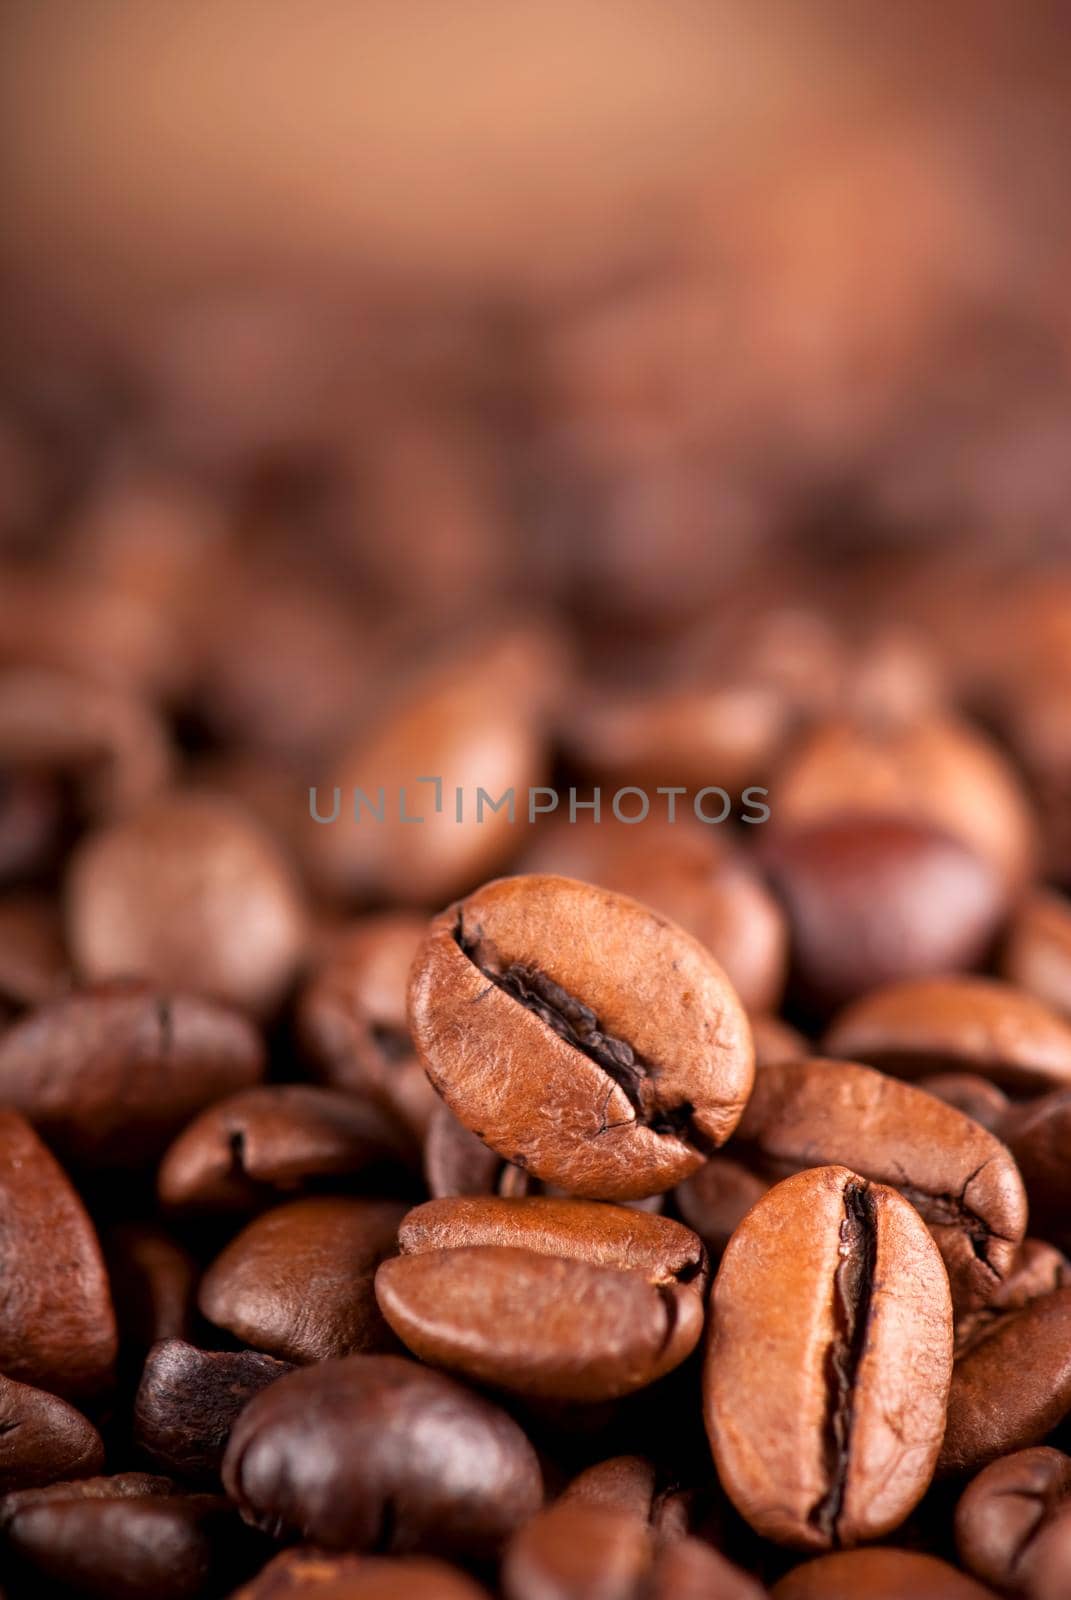 Closeup of coffee beans with focus